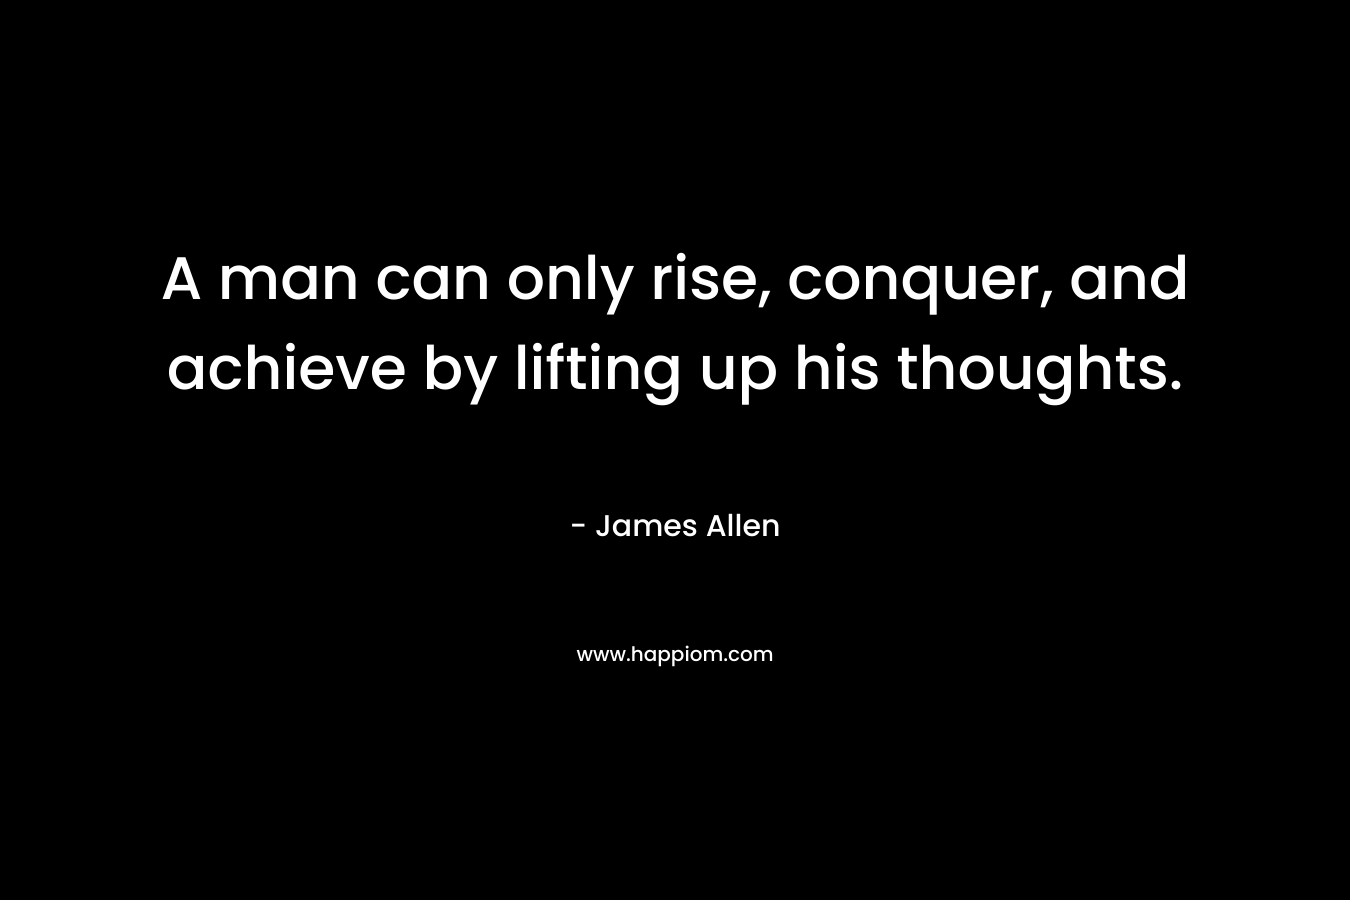 A man can only rise, conquer, and achieve by lifting up his thoughts. – James Allen